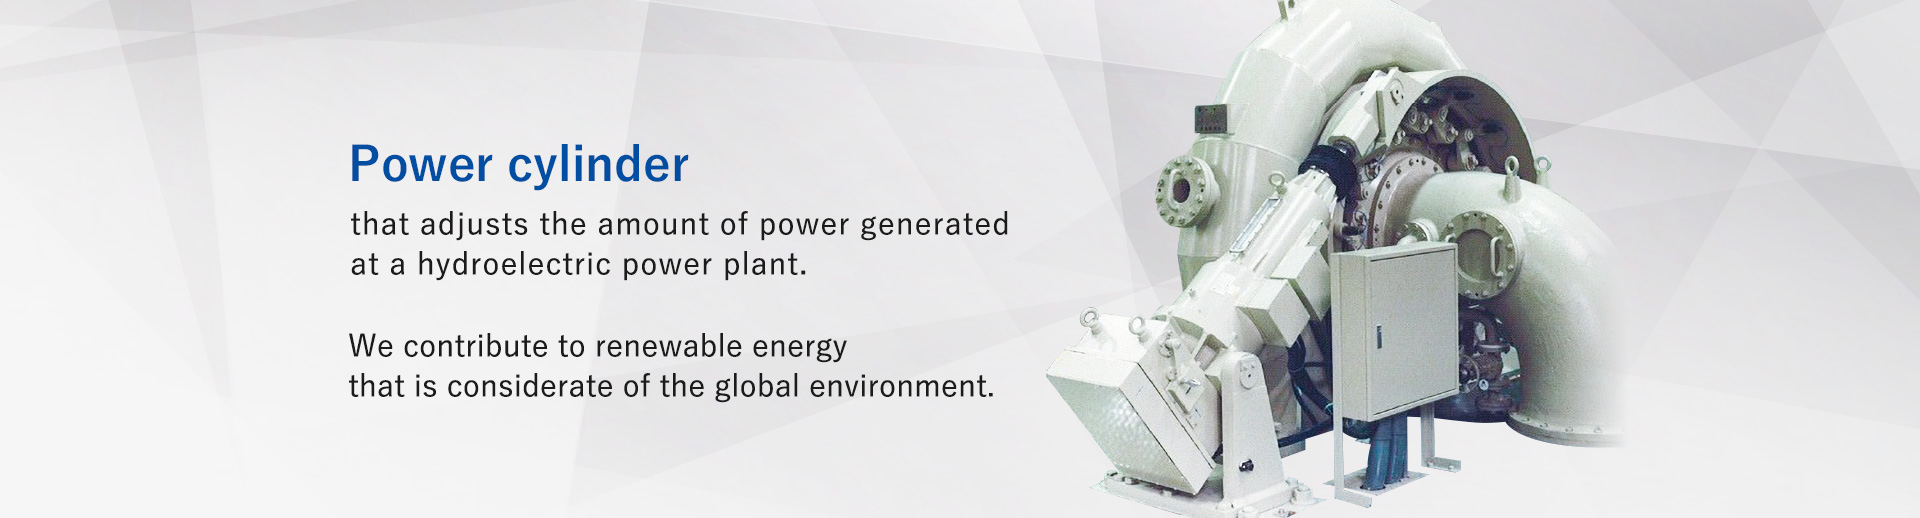 A power cylinder that adjusts the amount of power generated at hydroelectric power plants.Contributes to renewable energy that is considerate of the global environmental.